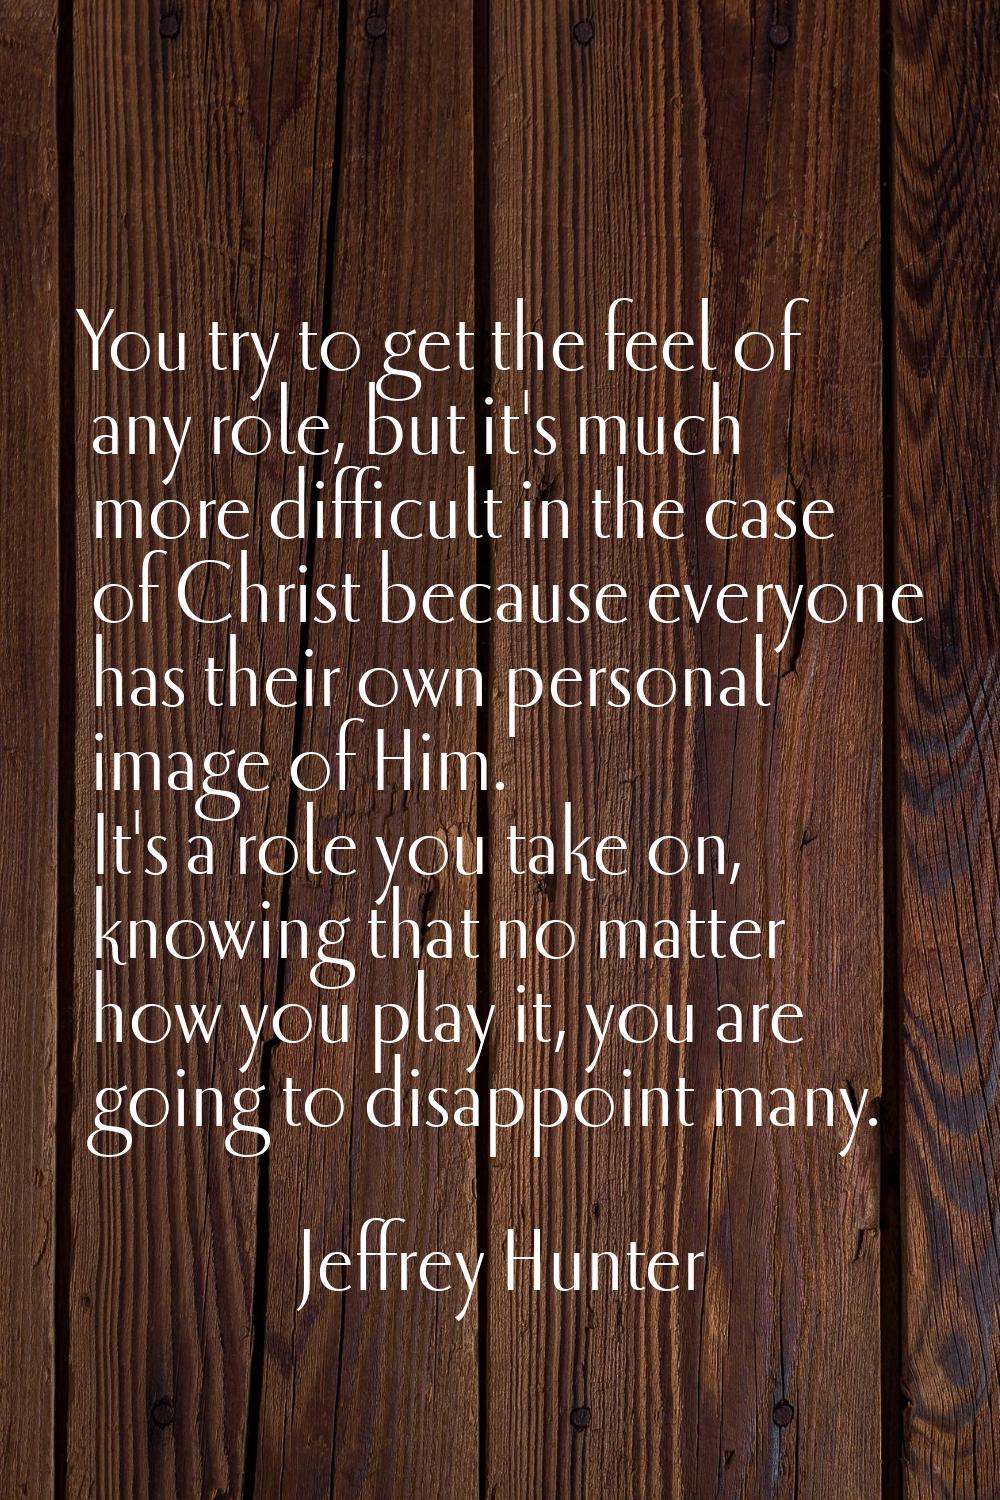 You try to get the feel of any role, but it's much more difficult in the case of Christ because eve